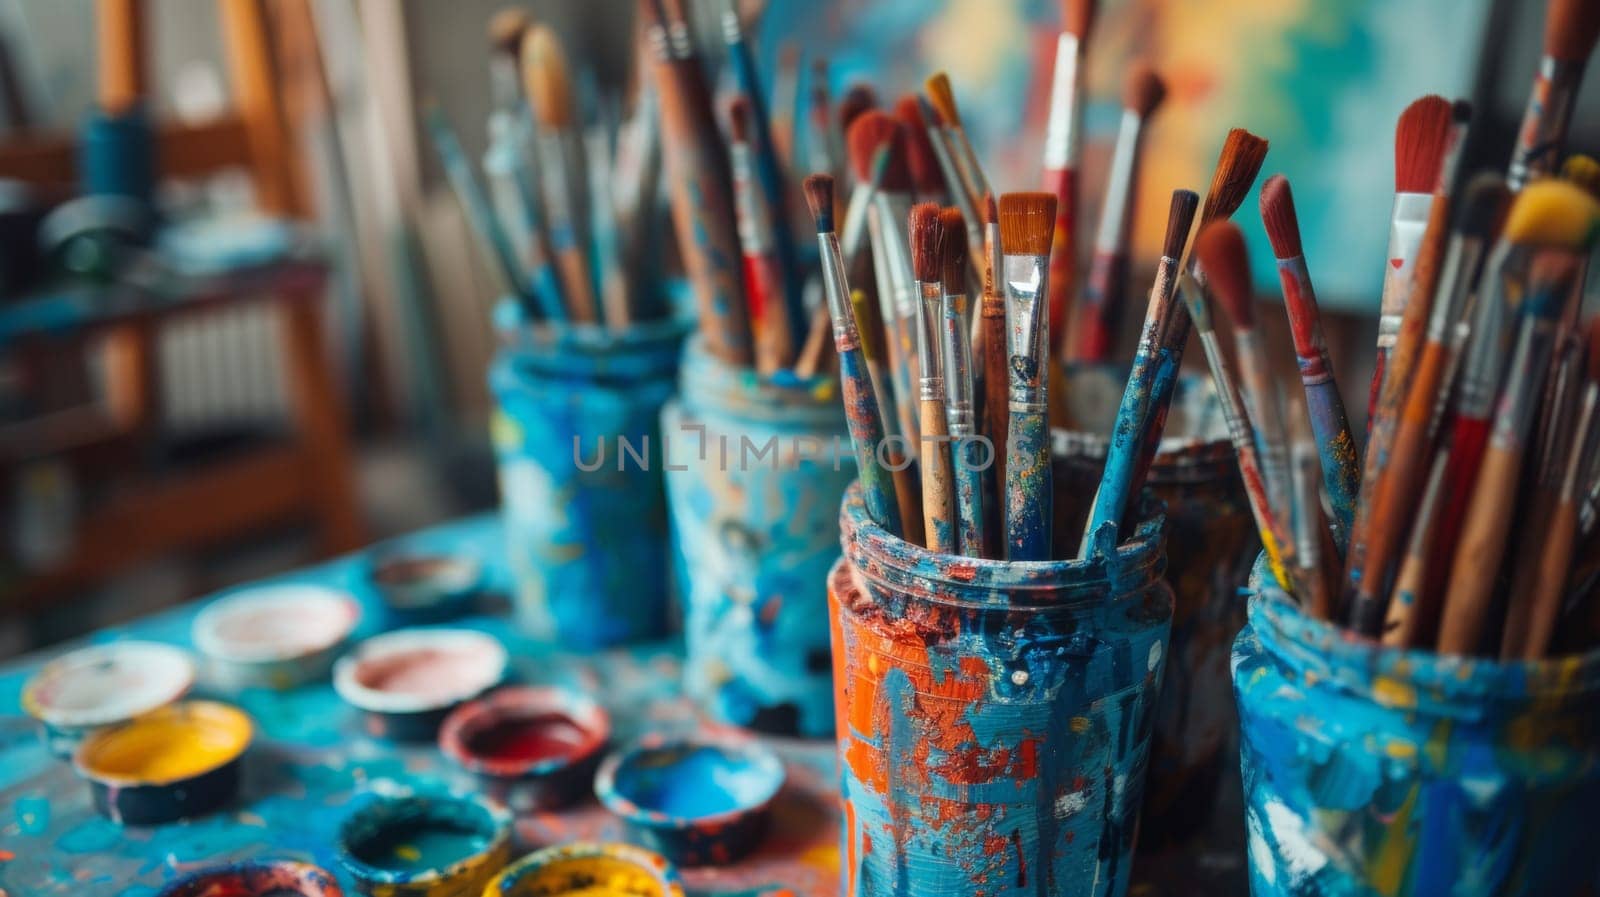 A table with paint brushes and jars of paints on it, AI by starush